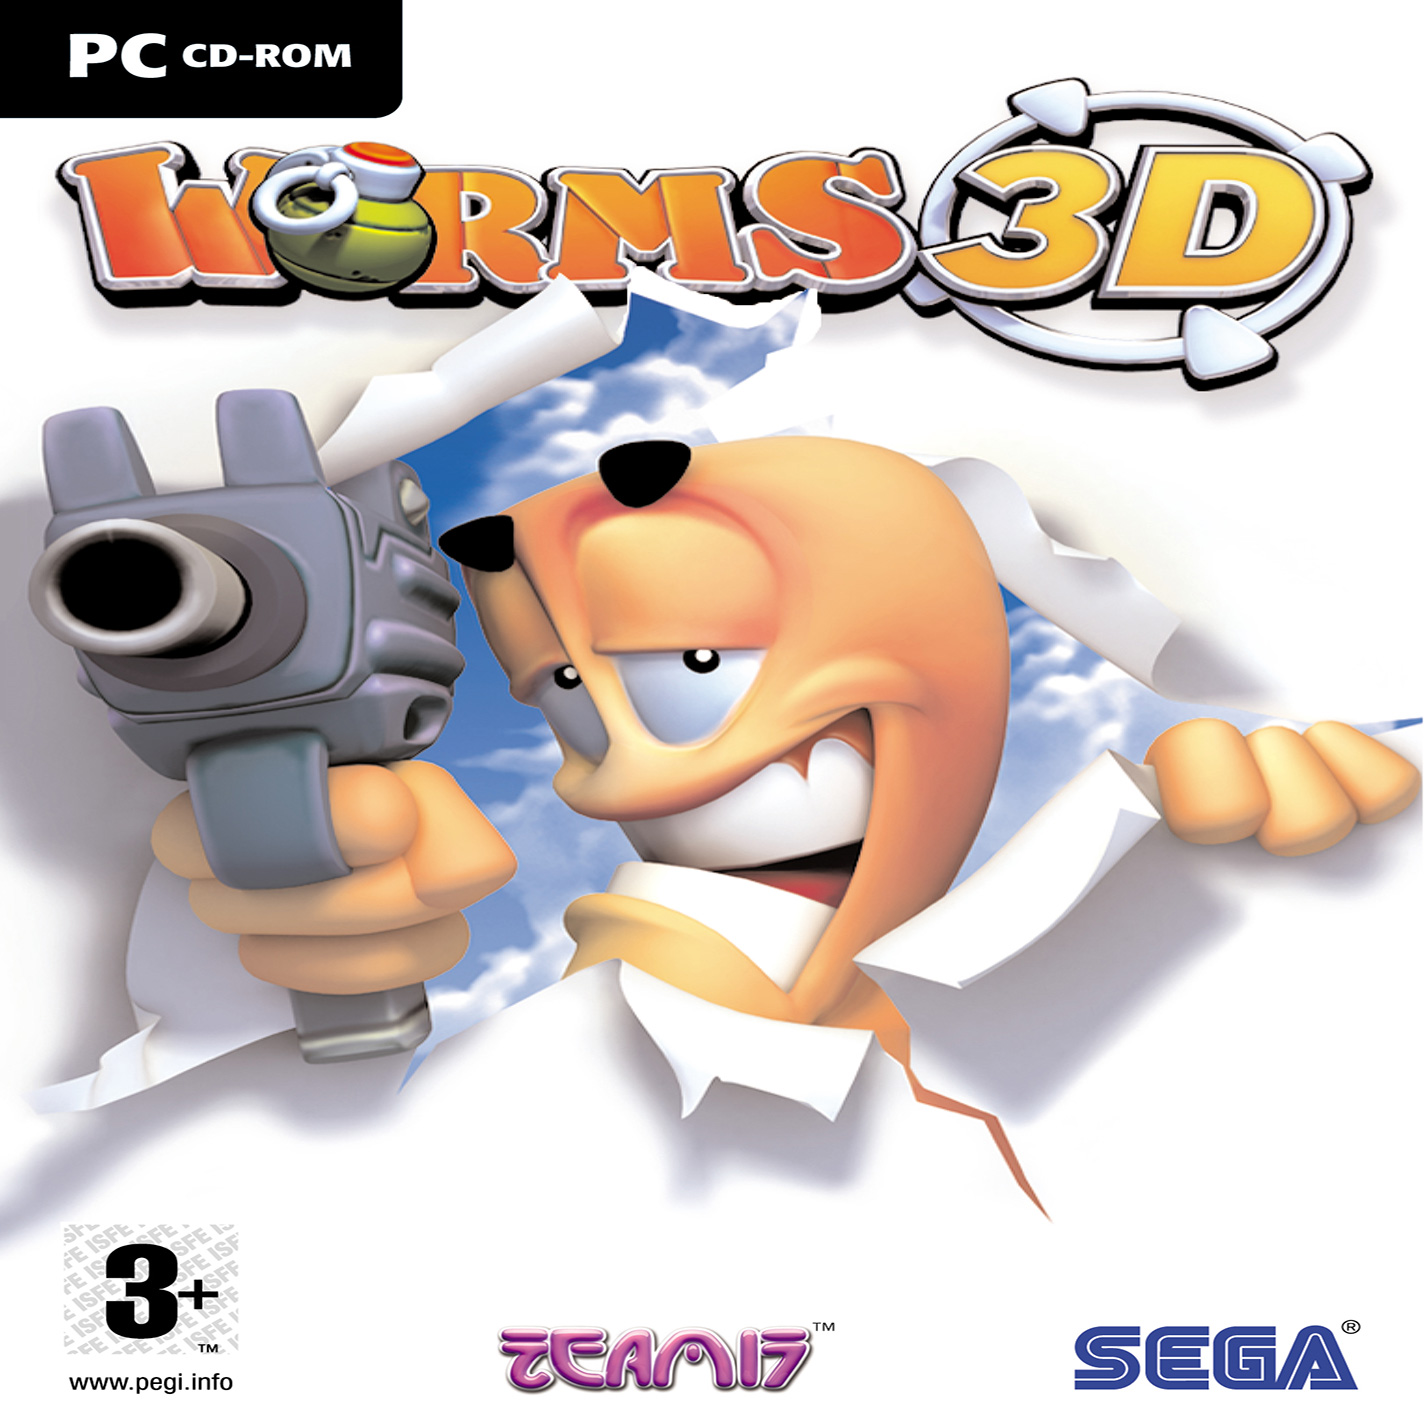 Worms 3D - predn CD obal